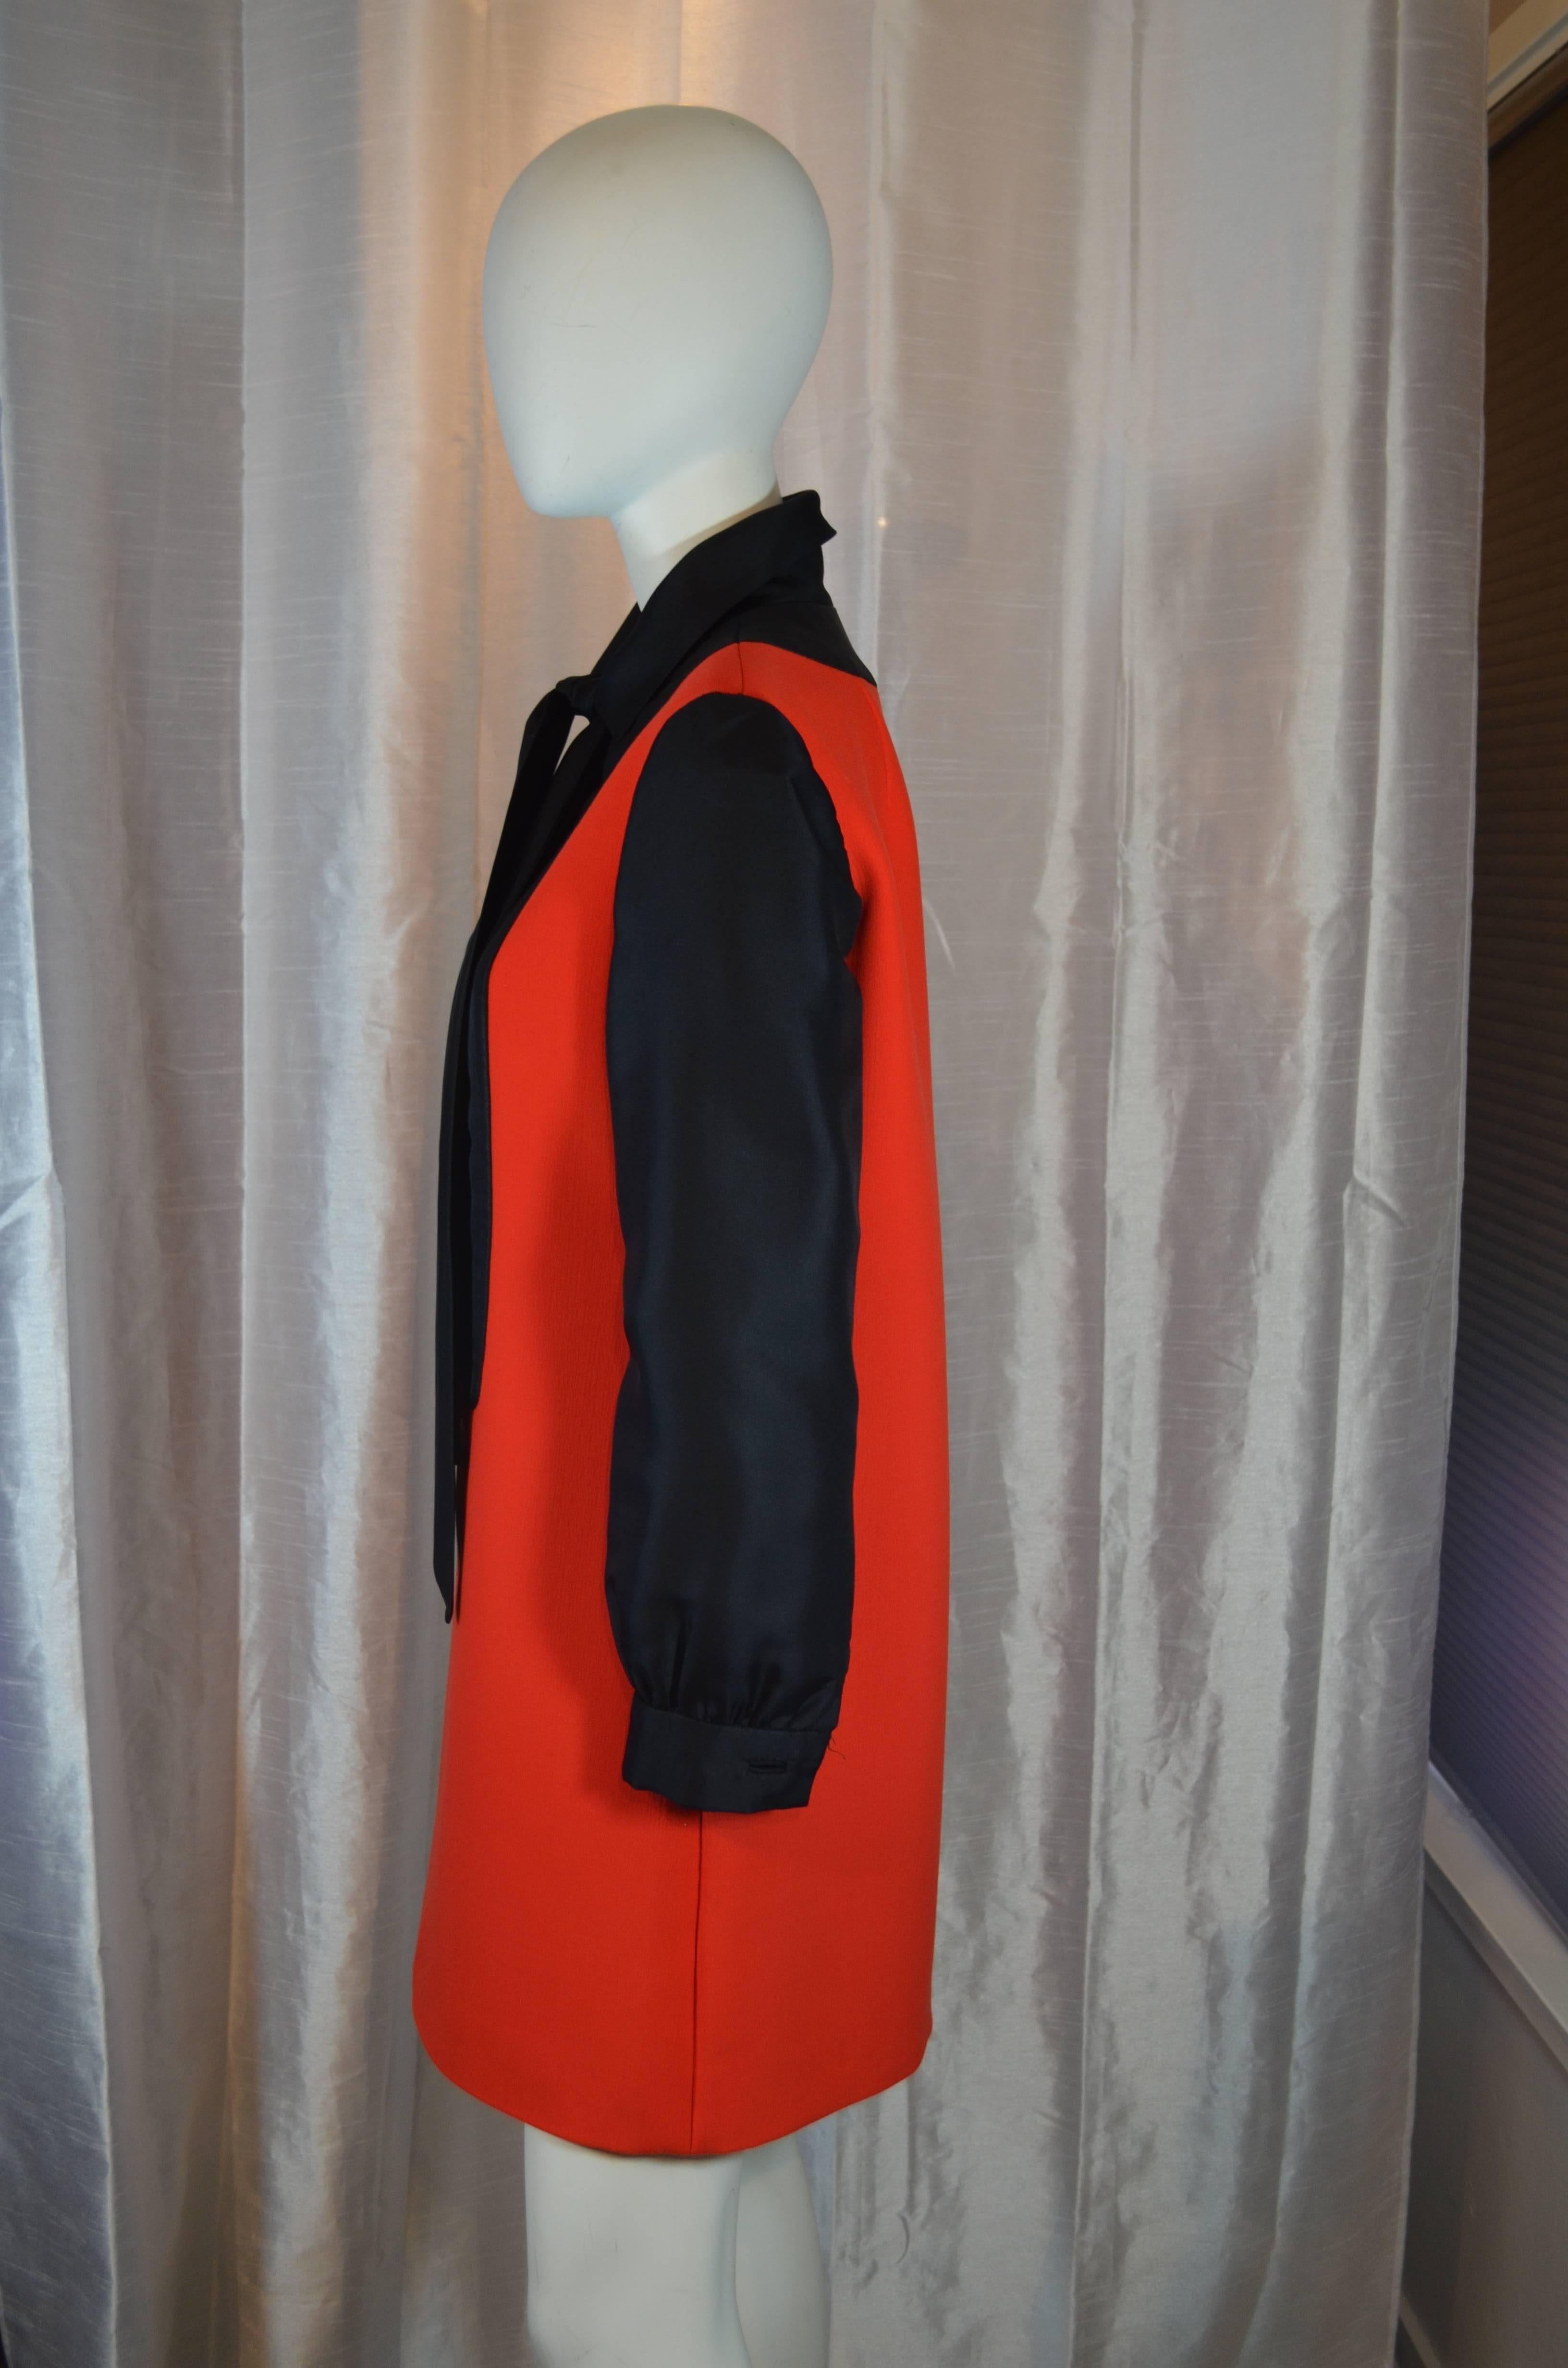 Vintage 1960's Geoffrey Beene black and red A-line tuxedo dress is in excellent condition.  The inside has red organza sheer lining and some minor rips and tears consistent with age.  The exterior of the dress is made from red wool crepe and black